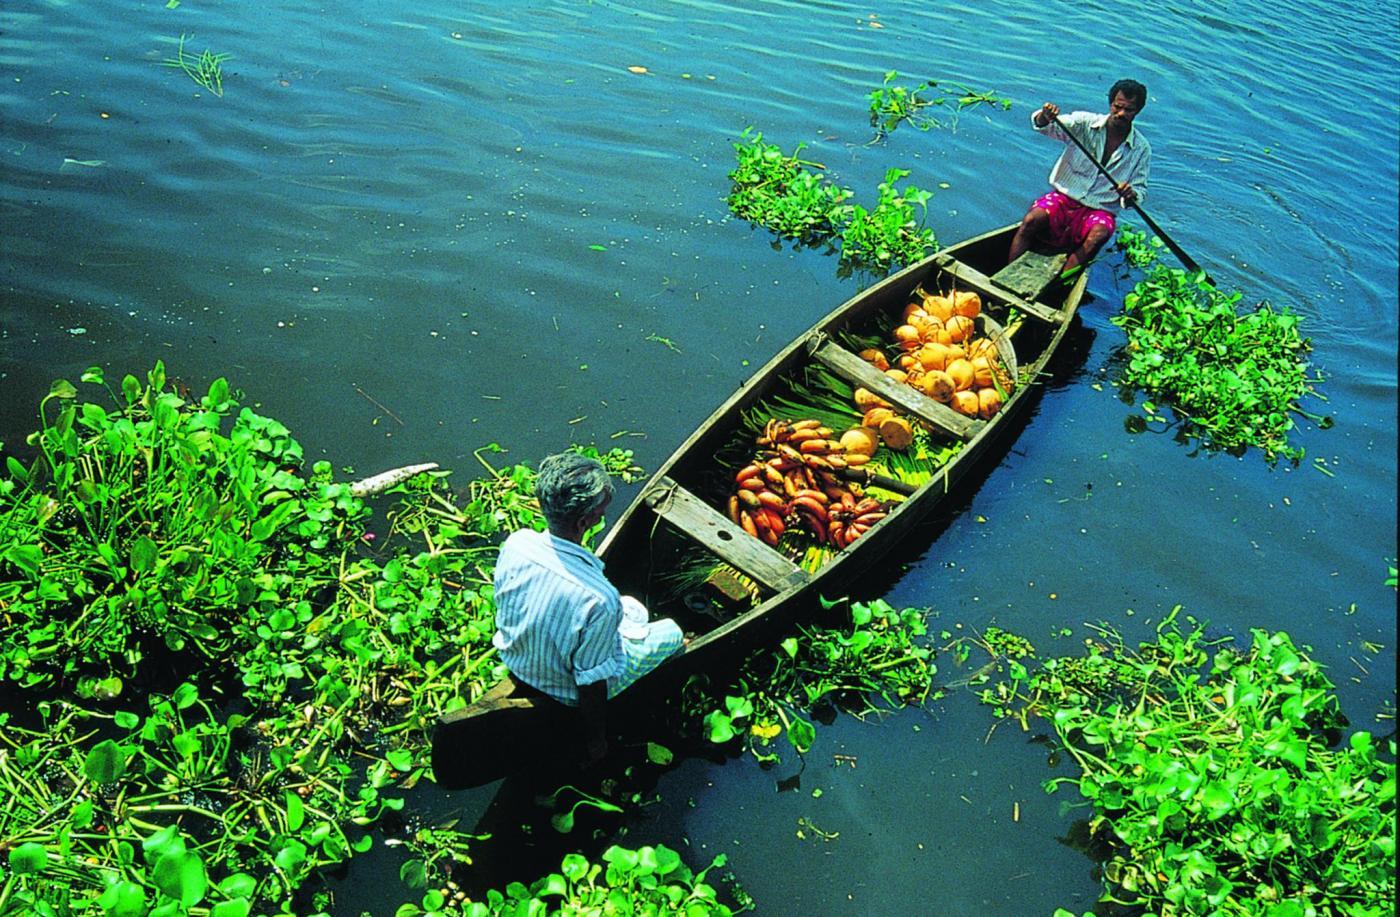 Kerala tourism garners global attention. Media India Group